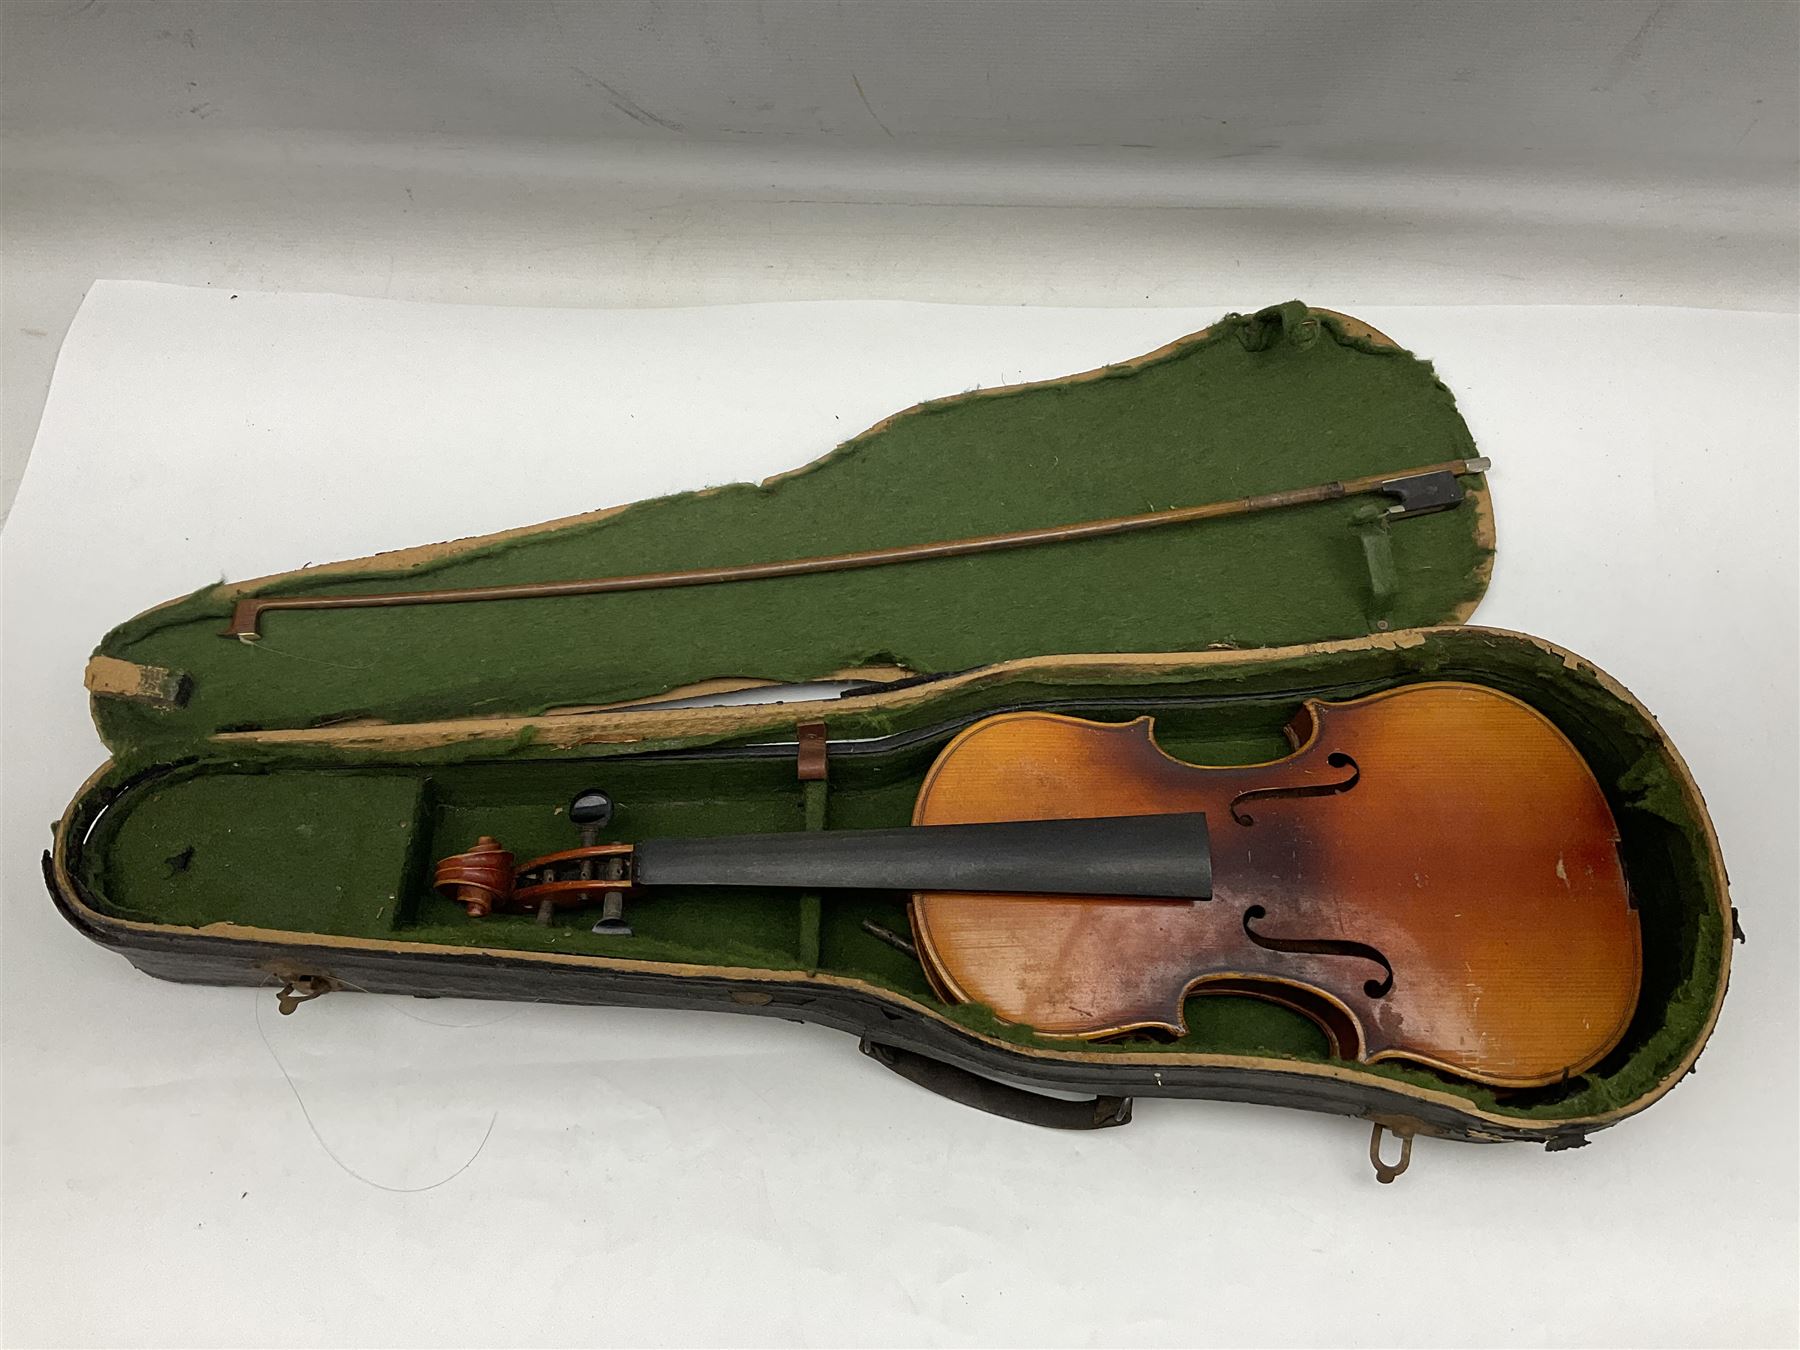 Czechoslovakian violin c1920 with 36cm two-piece maple back and ribs and spruce top - Image 33 of 34